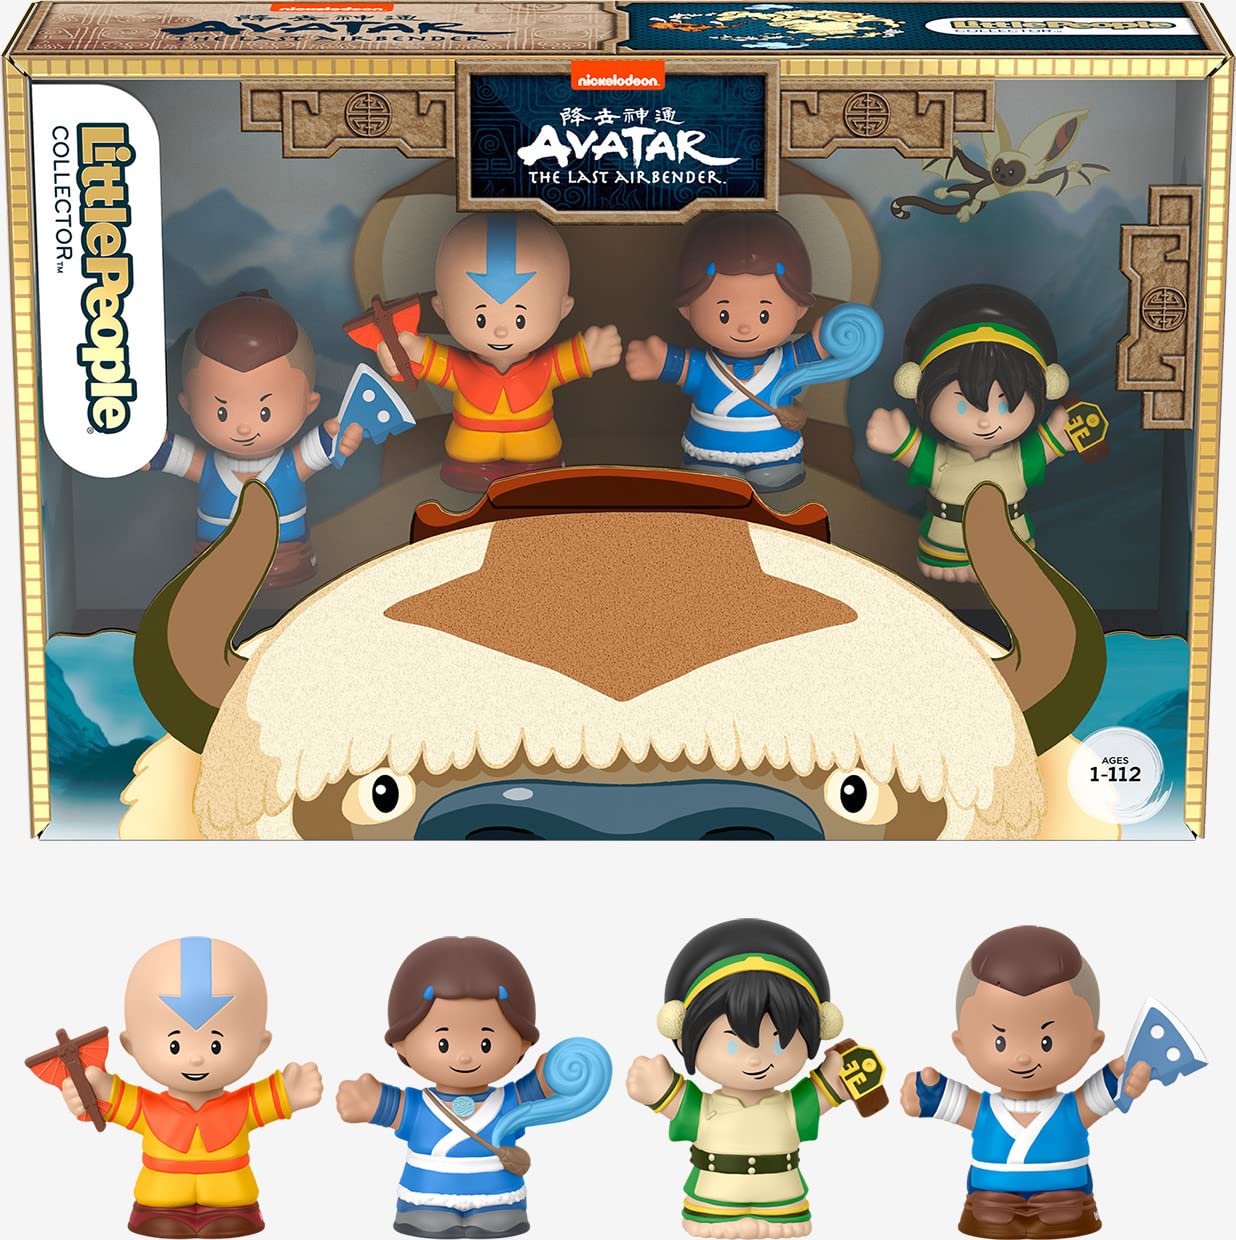 Fisher-Price Little People Collector Avatar: The Last Airbender, Gift Set of 4 Character Figures for Fans of The Series Ages 1 to 112